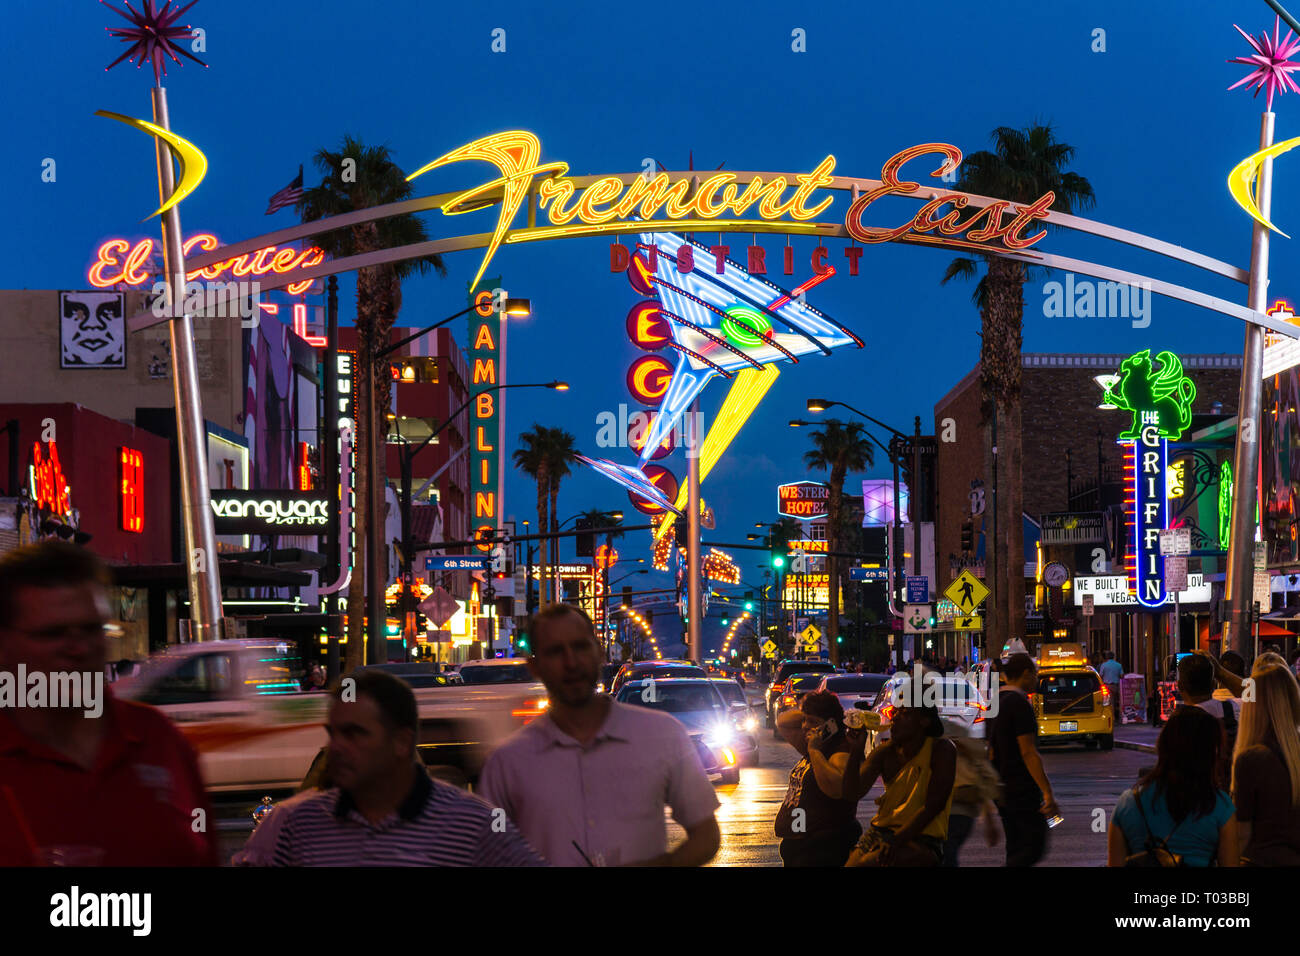 Neon lights shining brightly in Old Las Vegas or Downtown Las Vegas (one and the same) Stock Photo